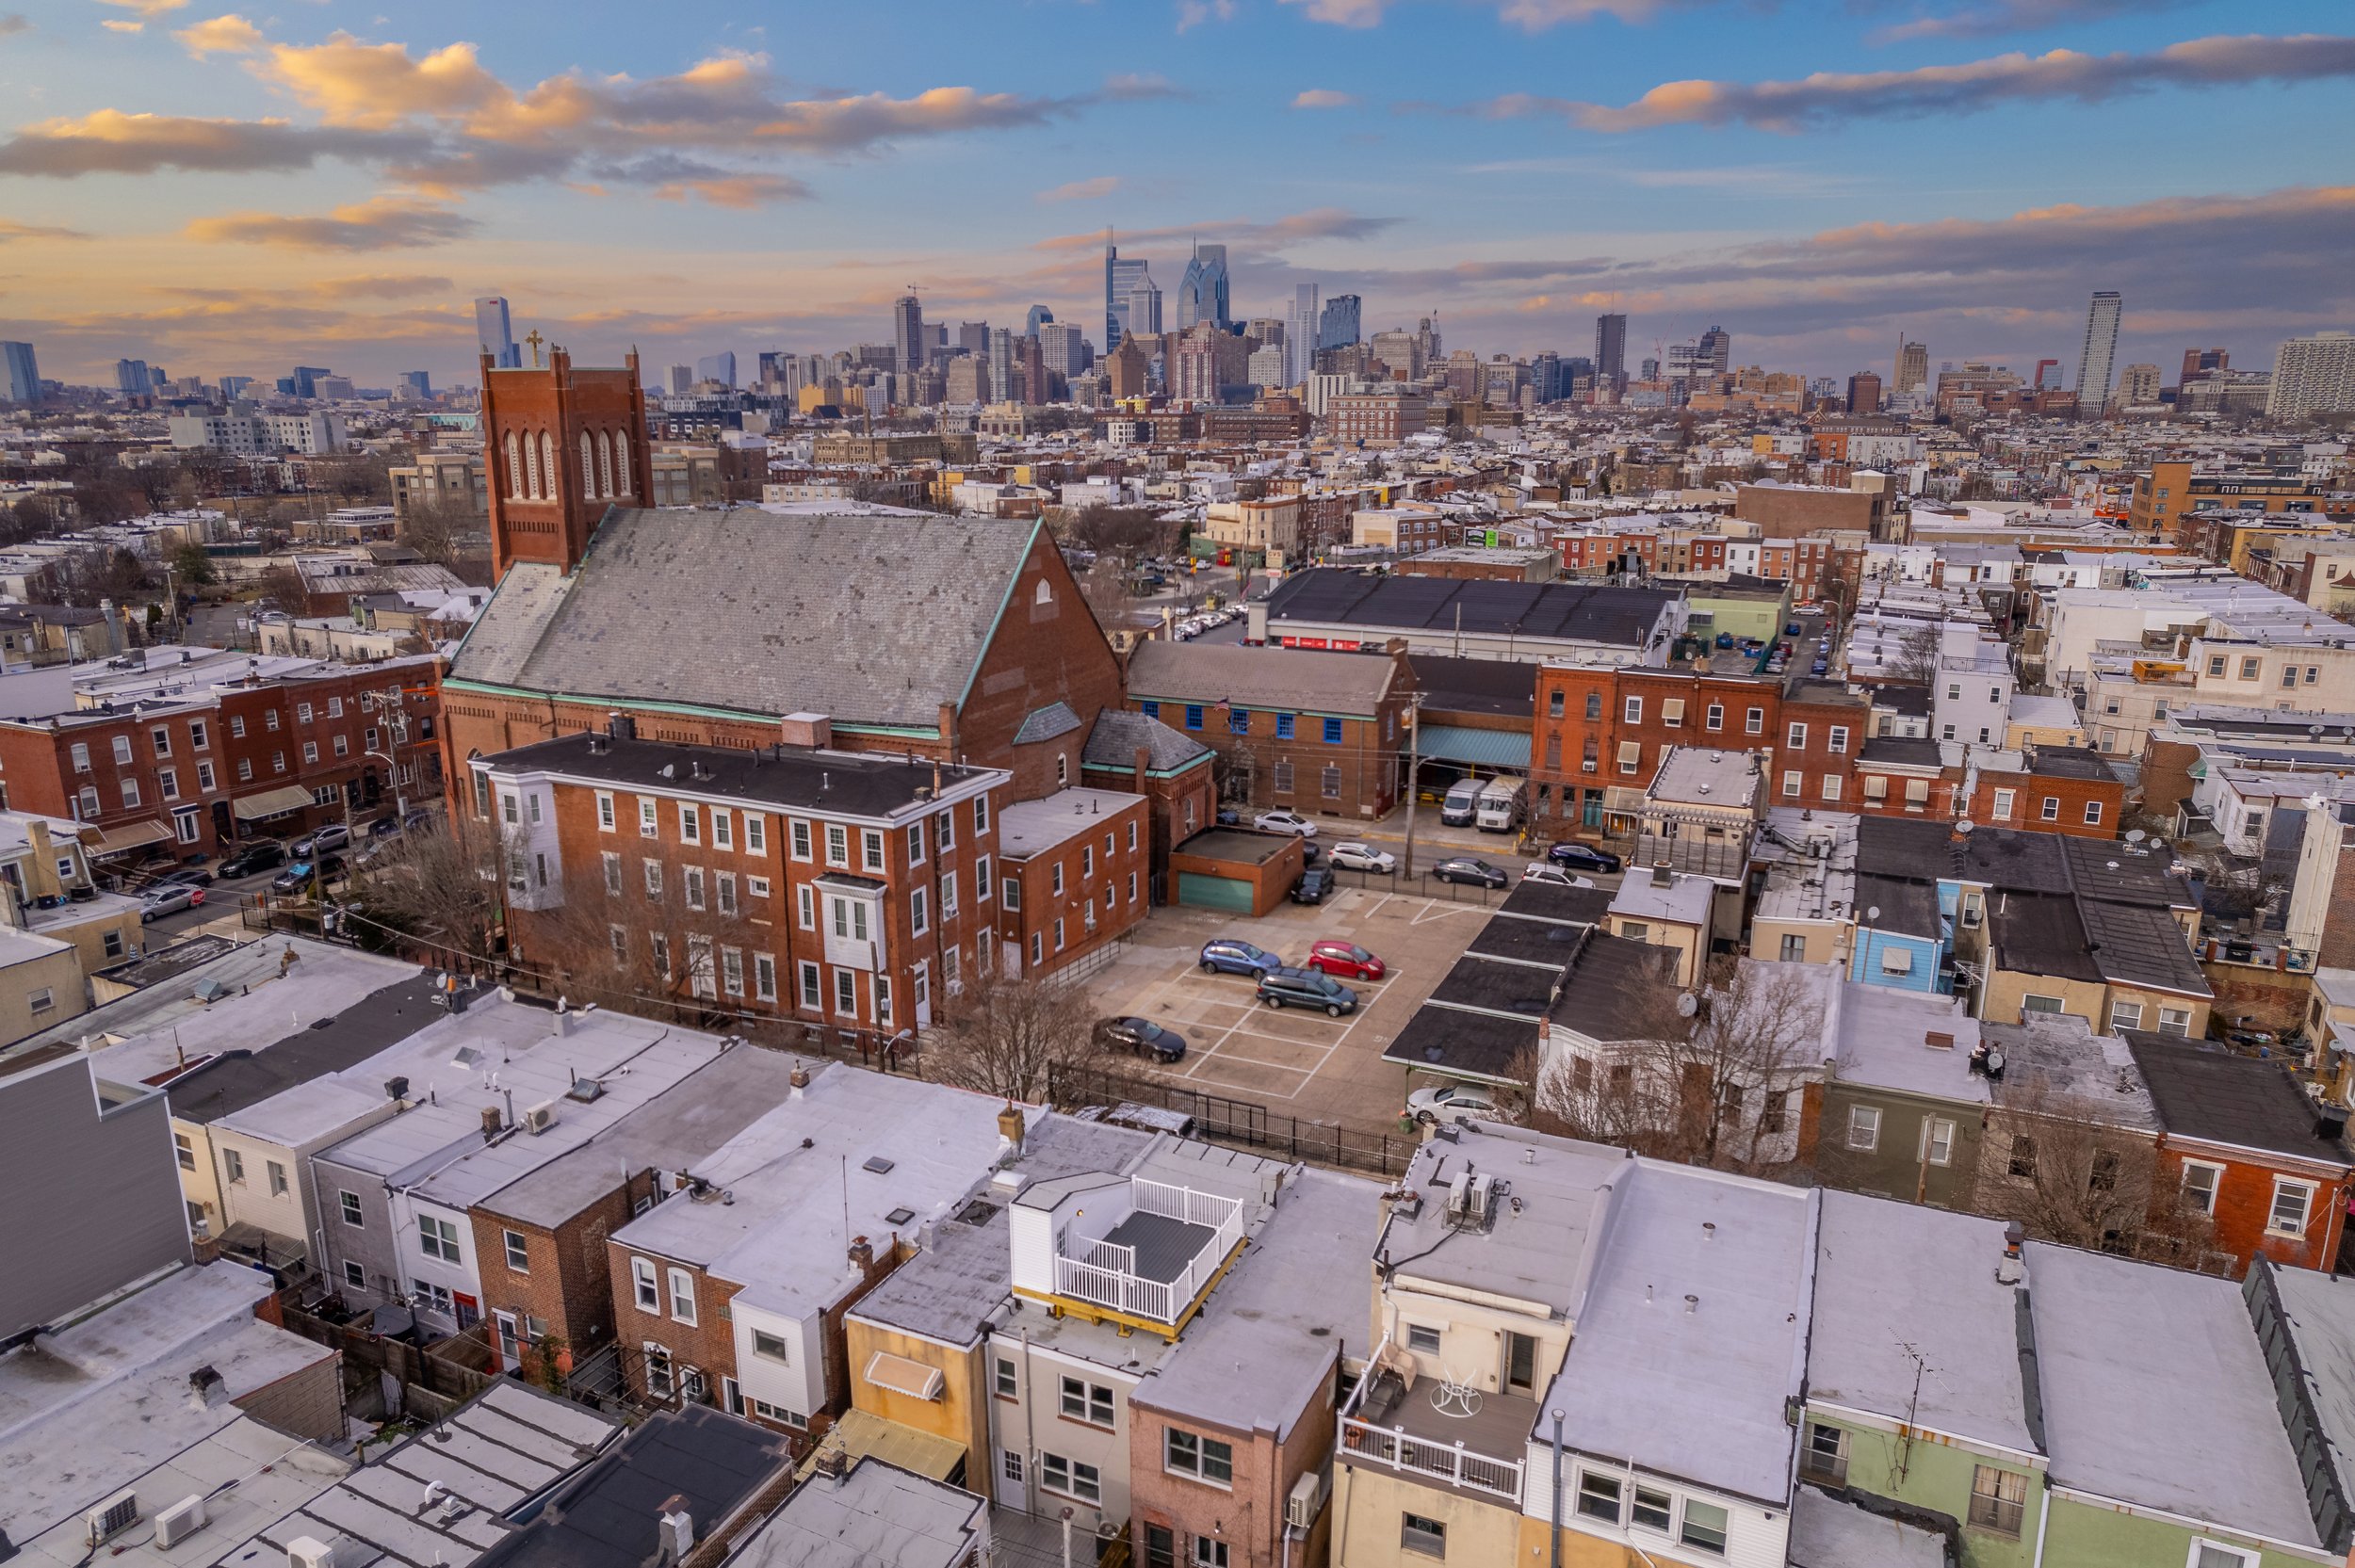 914 GREENWICH ST AERIAL PHOTOGRAPHY Ⓒ WEFILMPHILLY-3.jpg